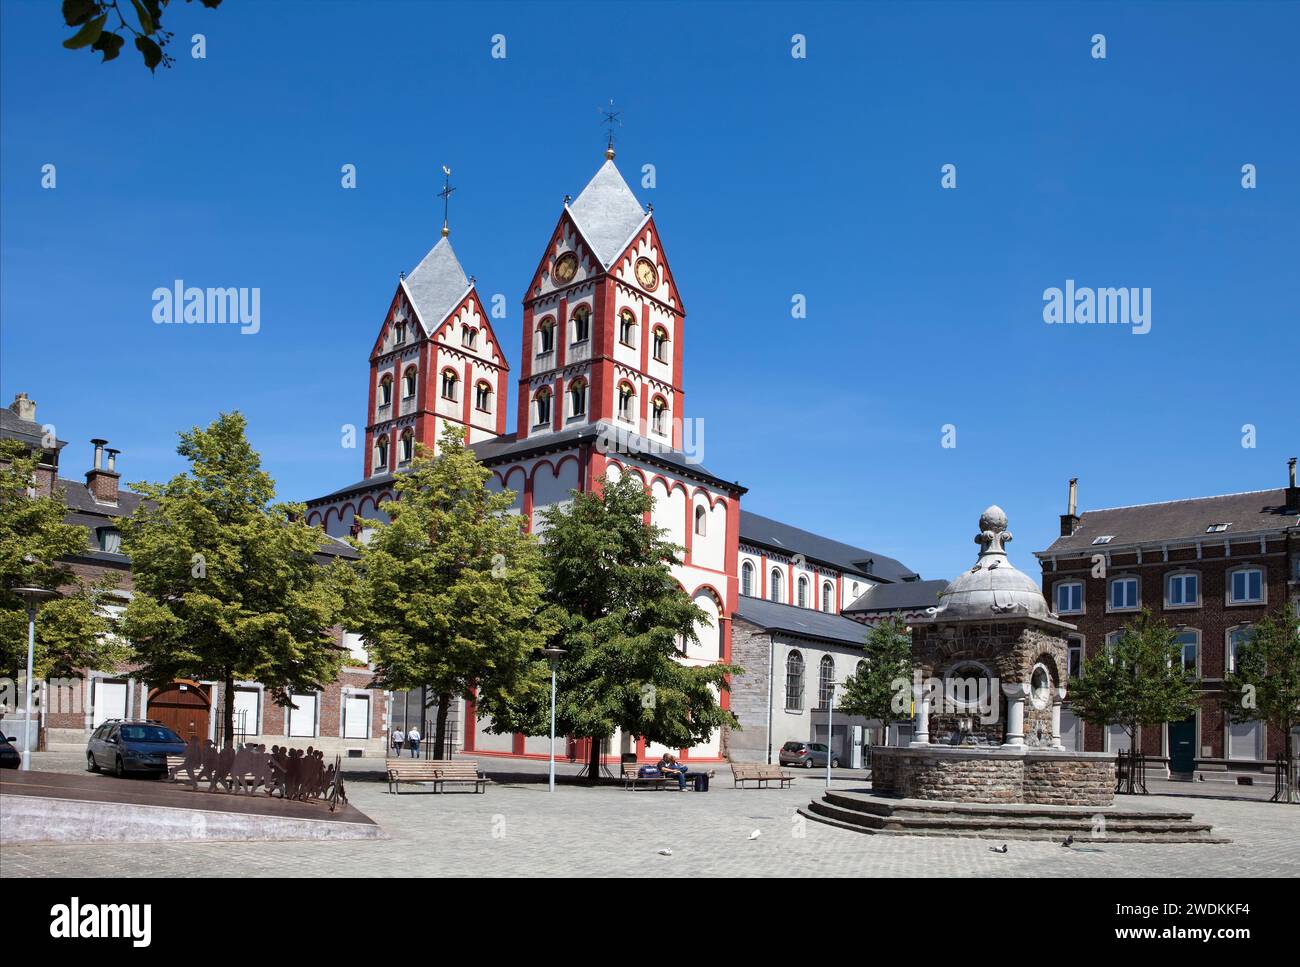 The sculpture group “Les Principautaires” by Mady Andrien, Church of St. Bartholomew, Liège, Belgium, Europe Stock Photo